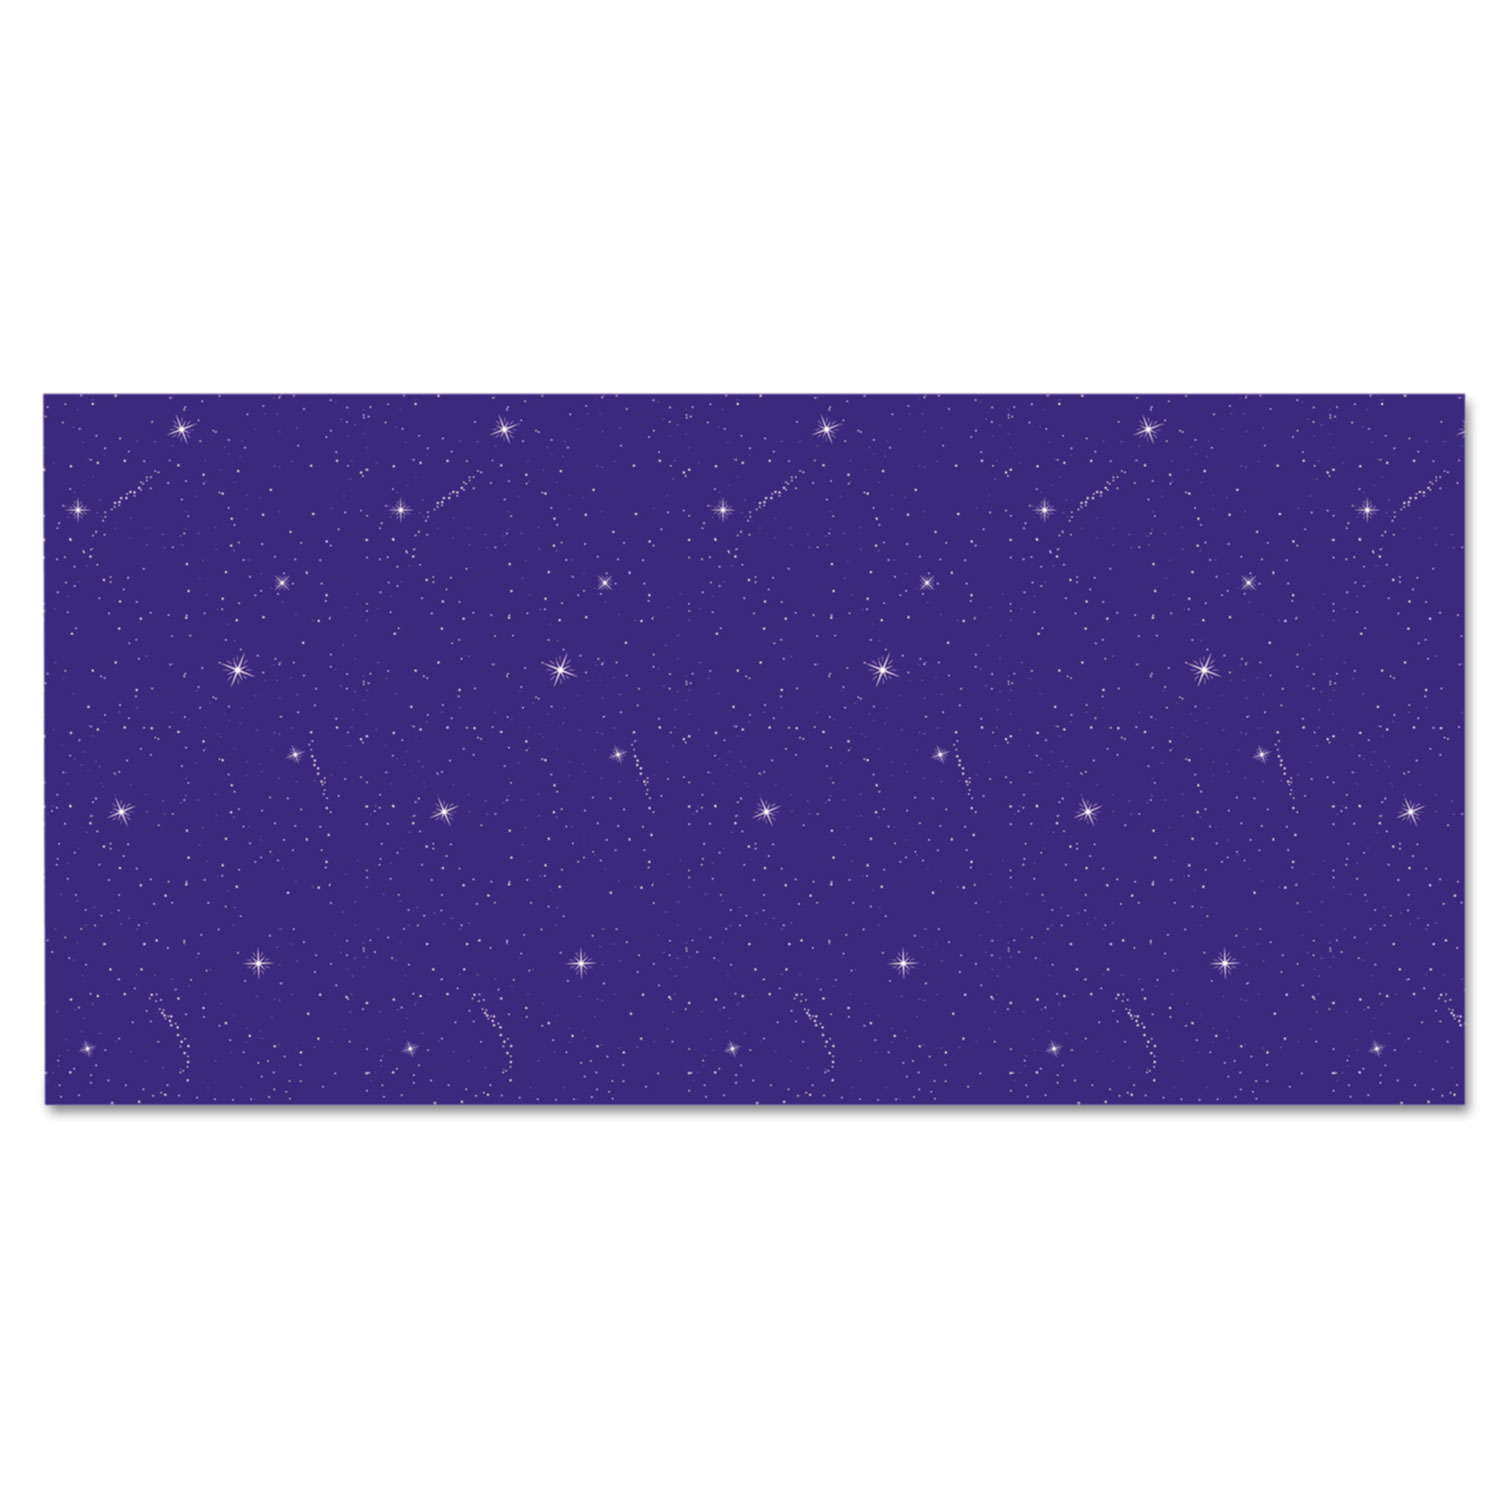  Pacon 0056225 Fadeless Designs Bulletin Board Paper, Night Sky, 48 x 50 ft. (PAC56225) 